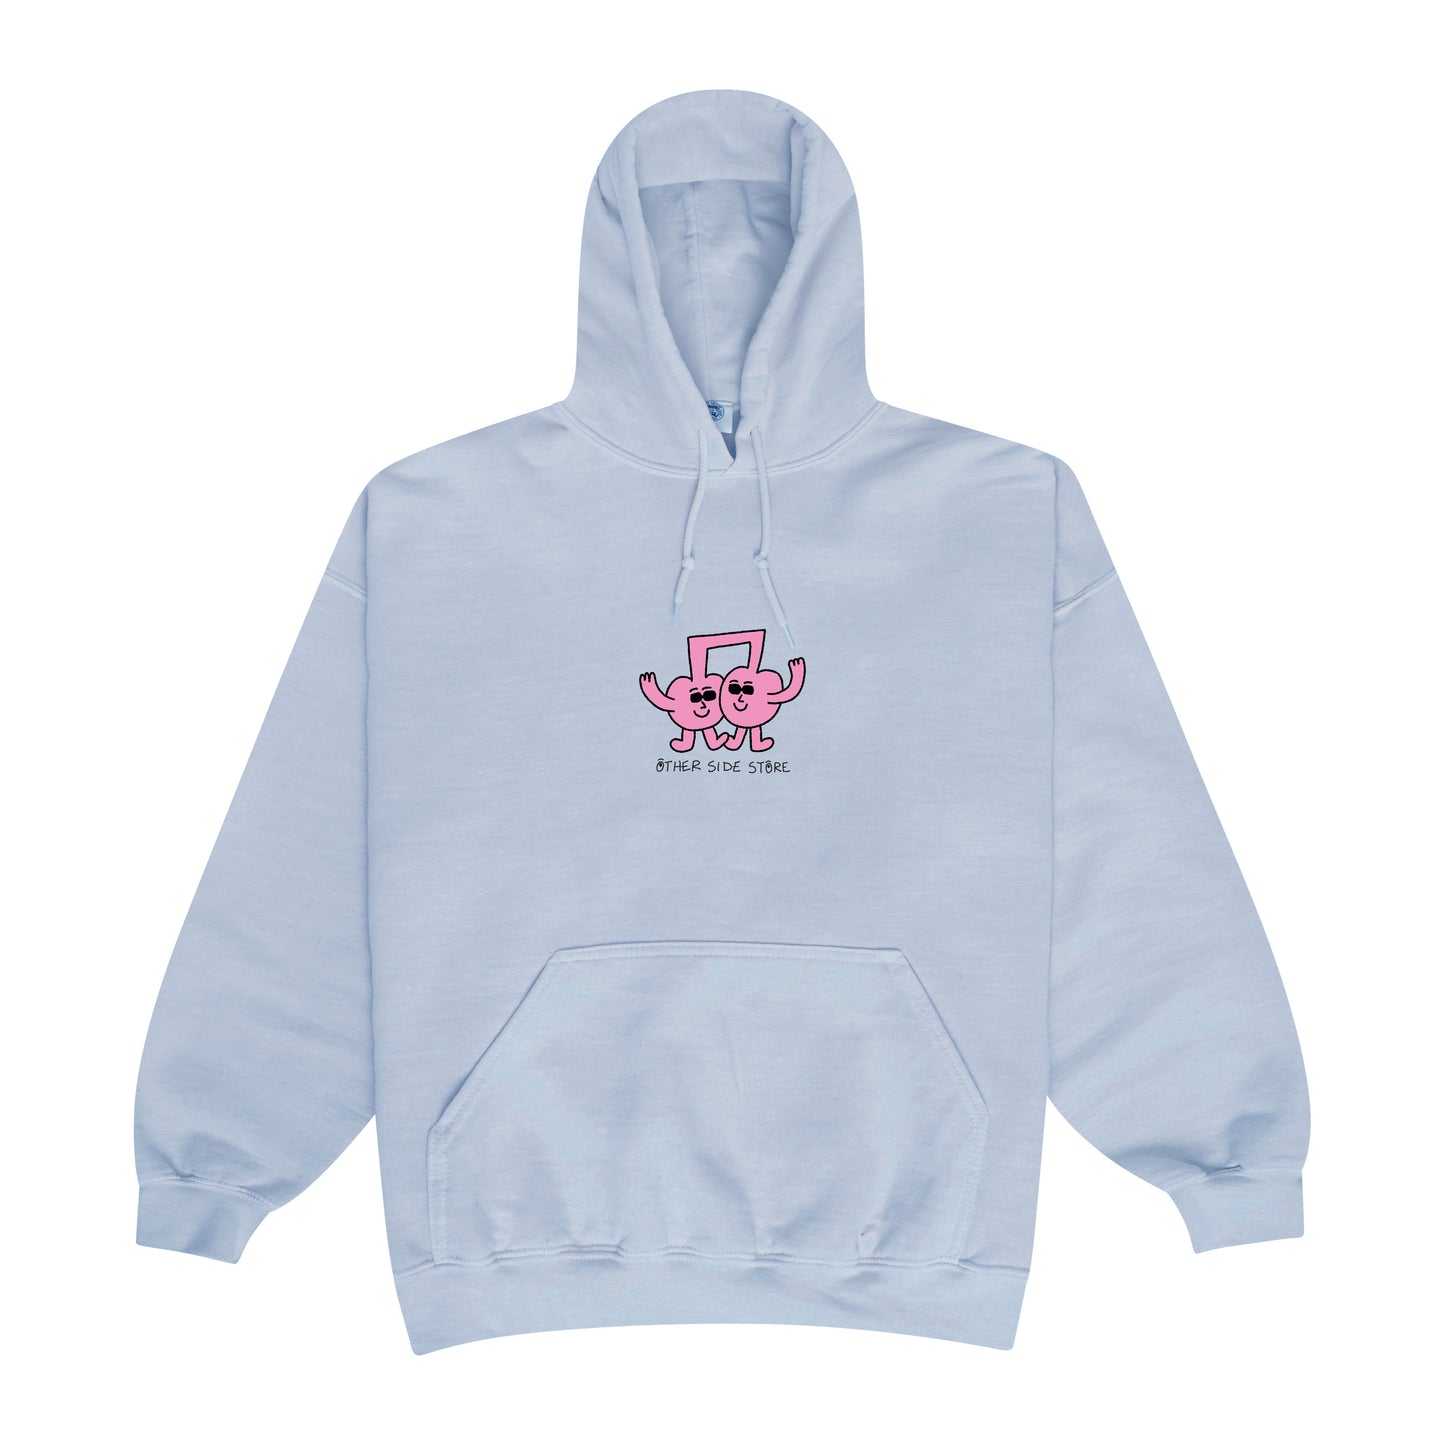 Other Side Store 'Fruity Note' Hoodie - Vintage Washed Baby Blue